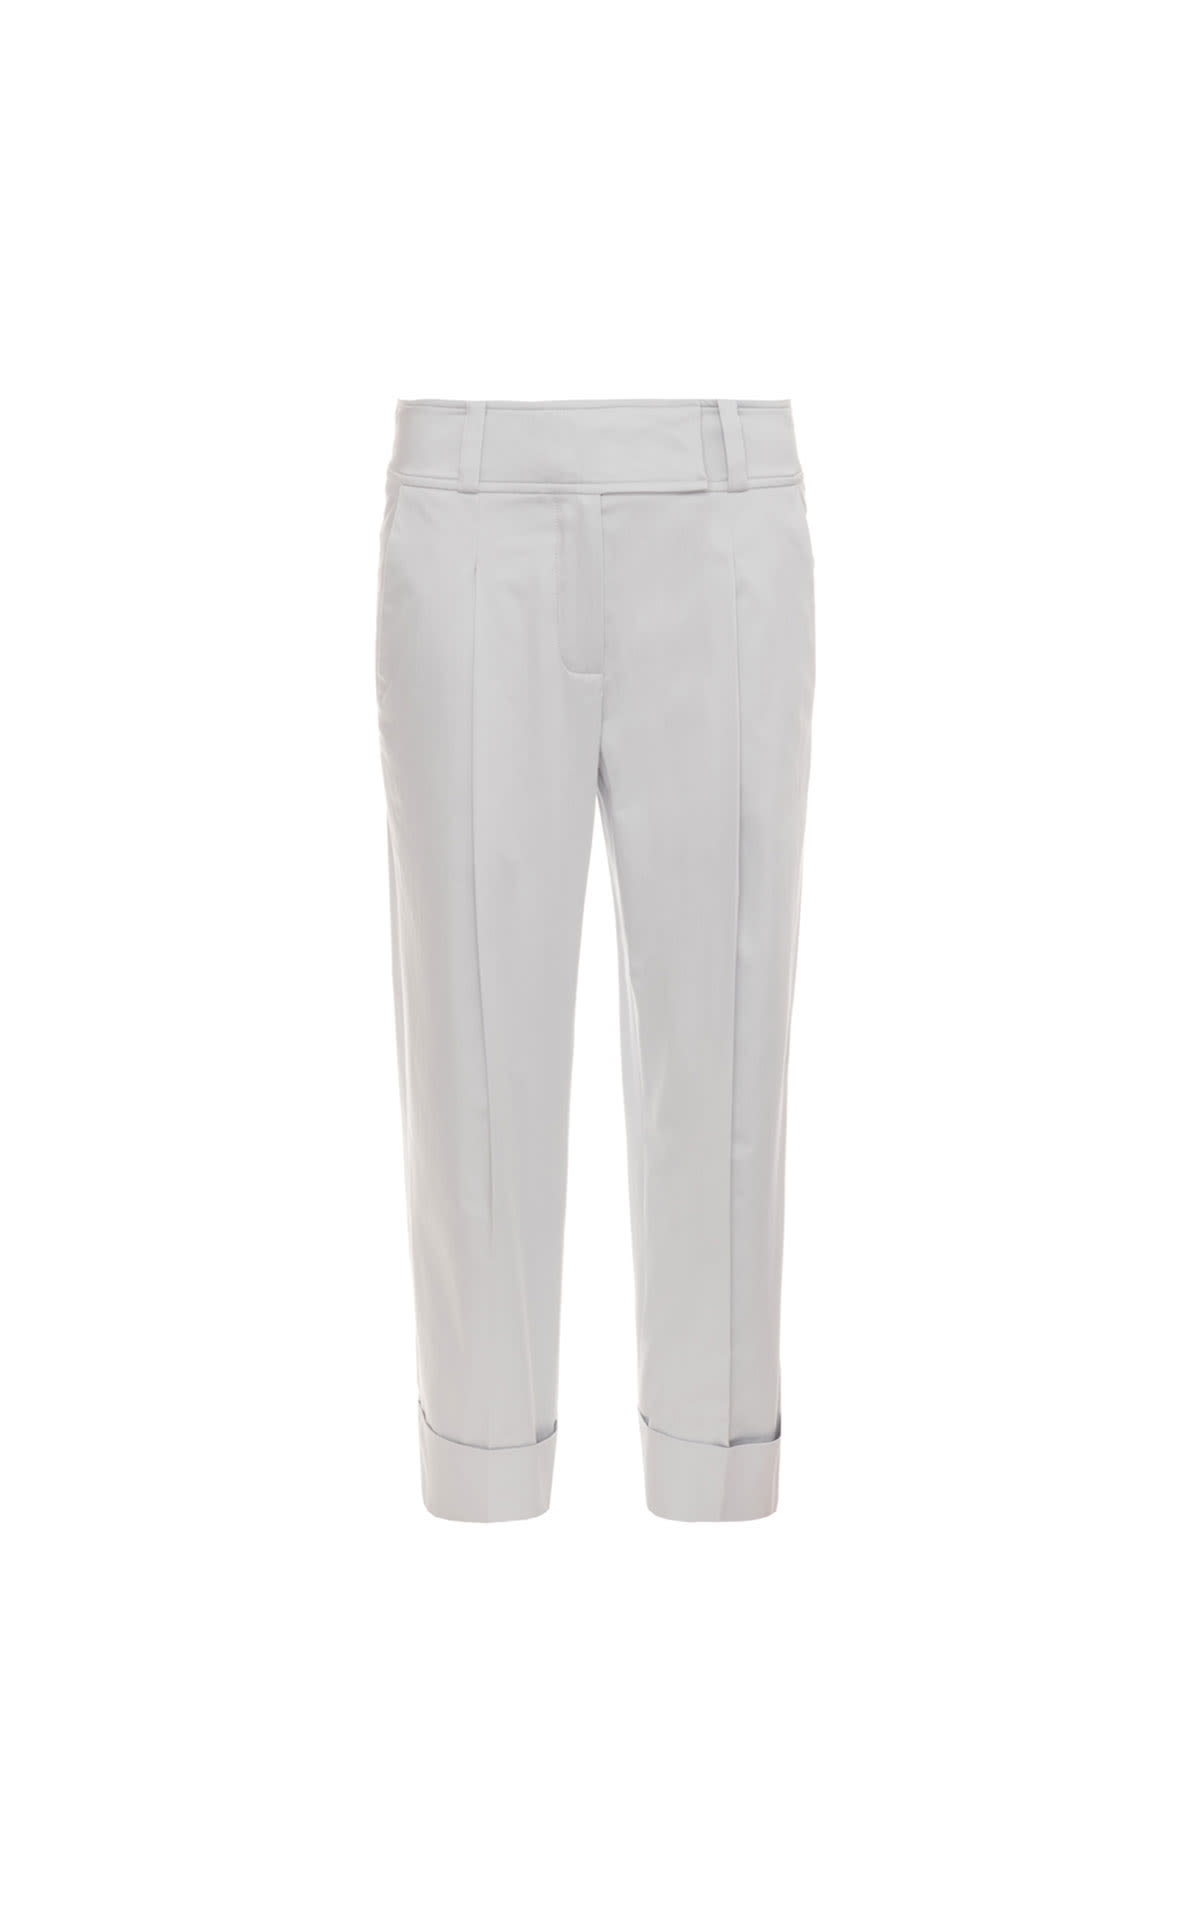 Eleventy Cotton turned up trousers womens from Bicester Village